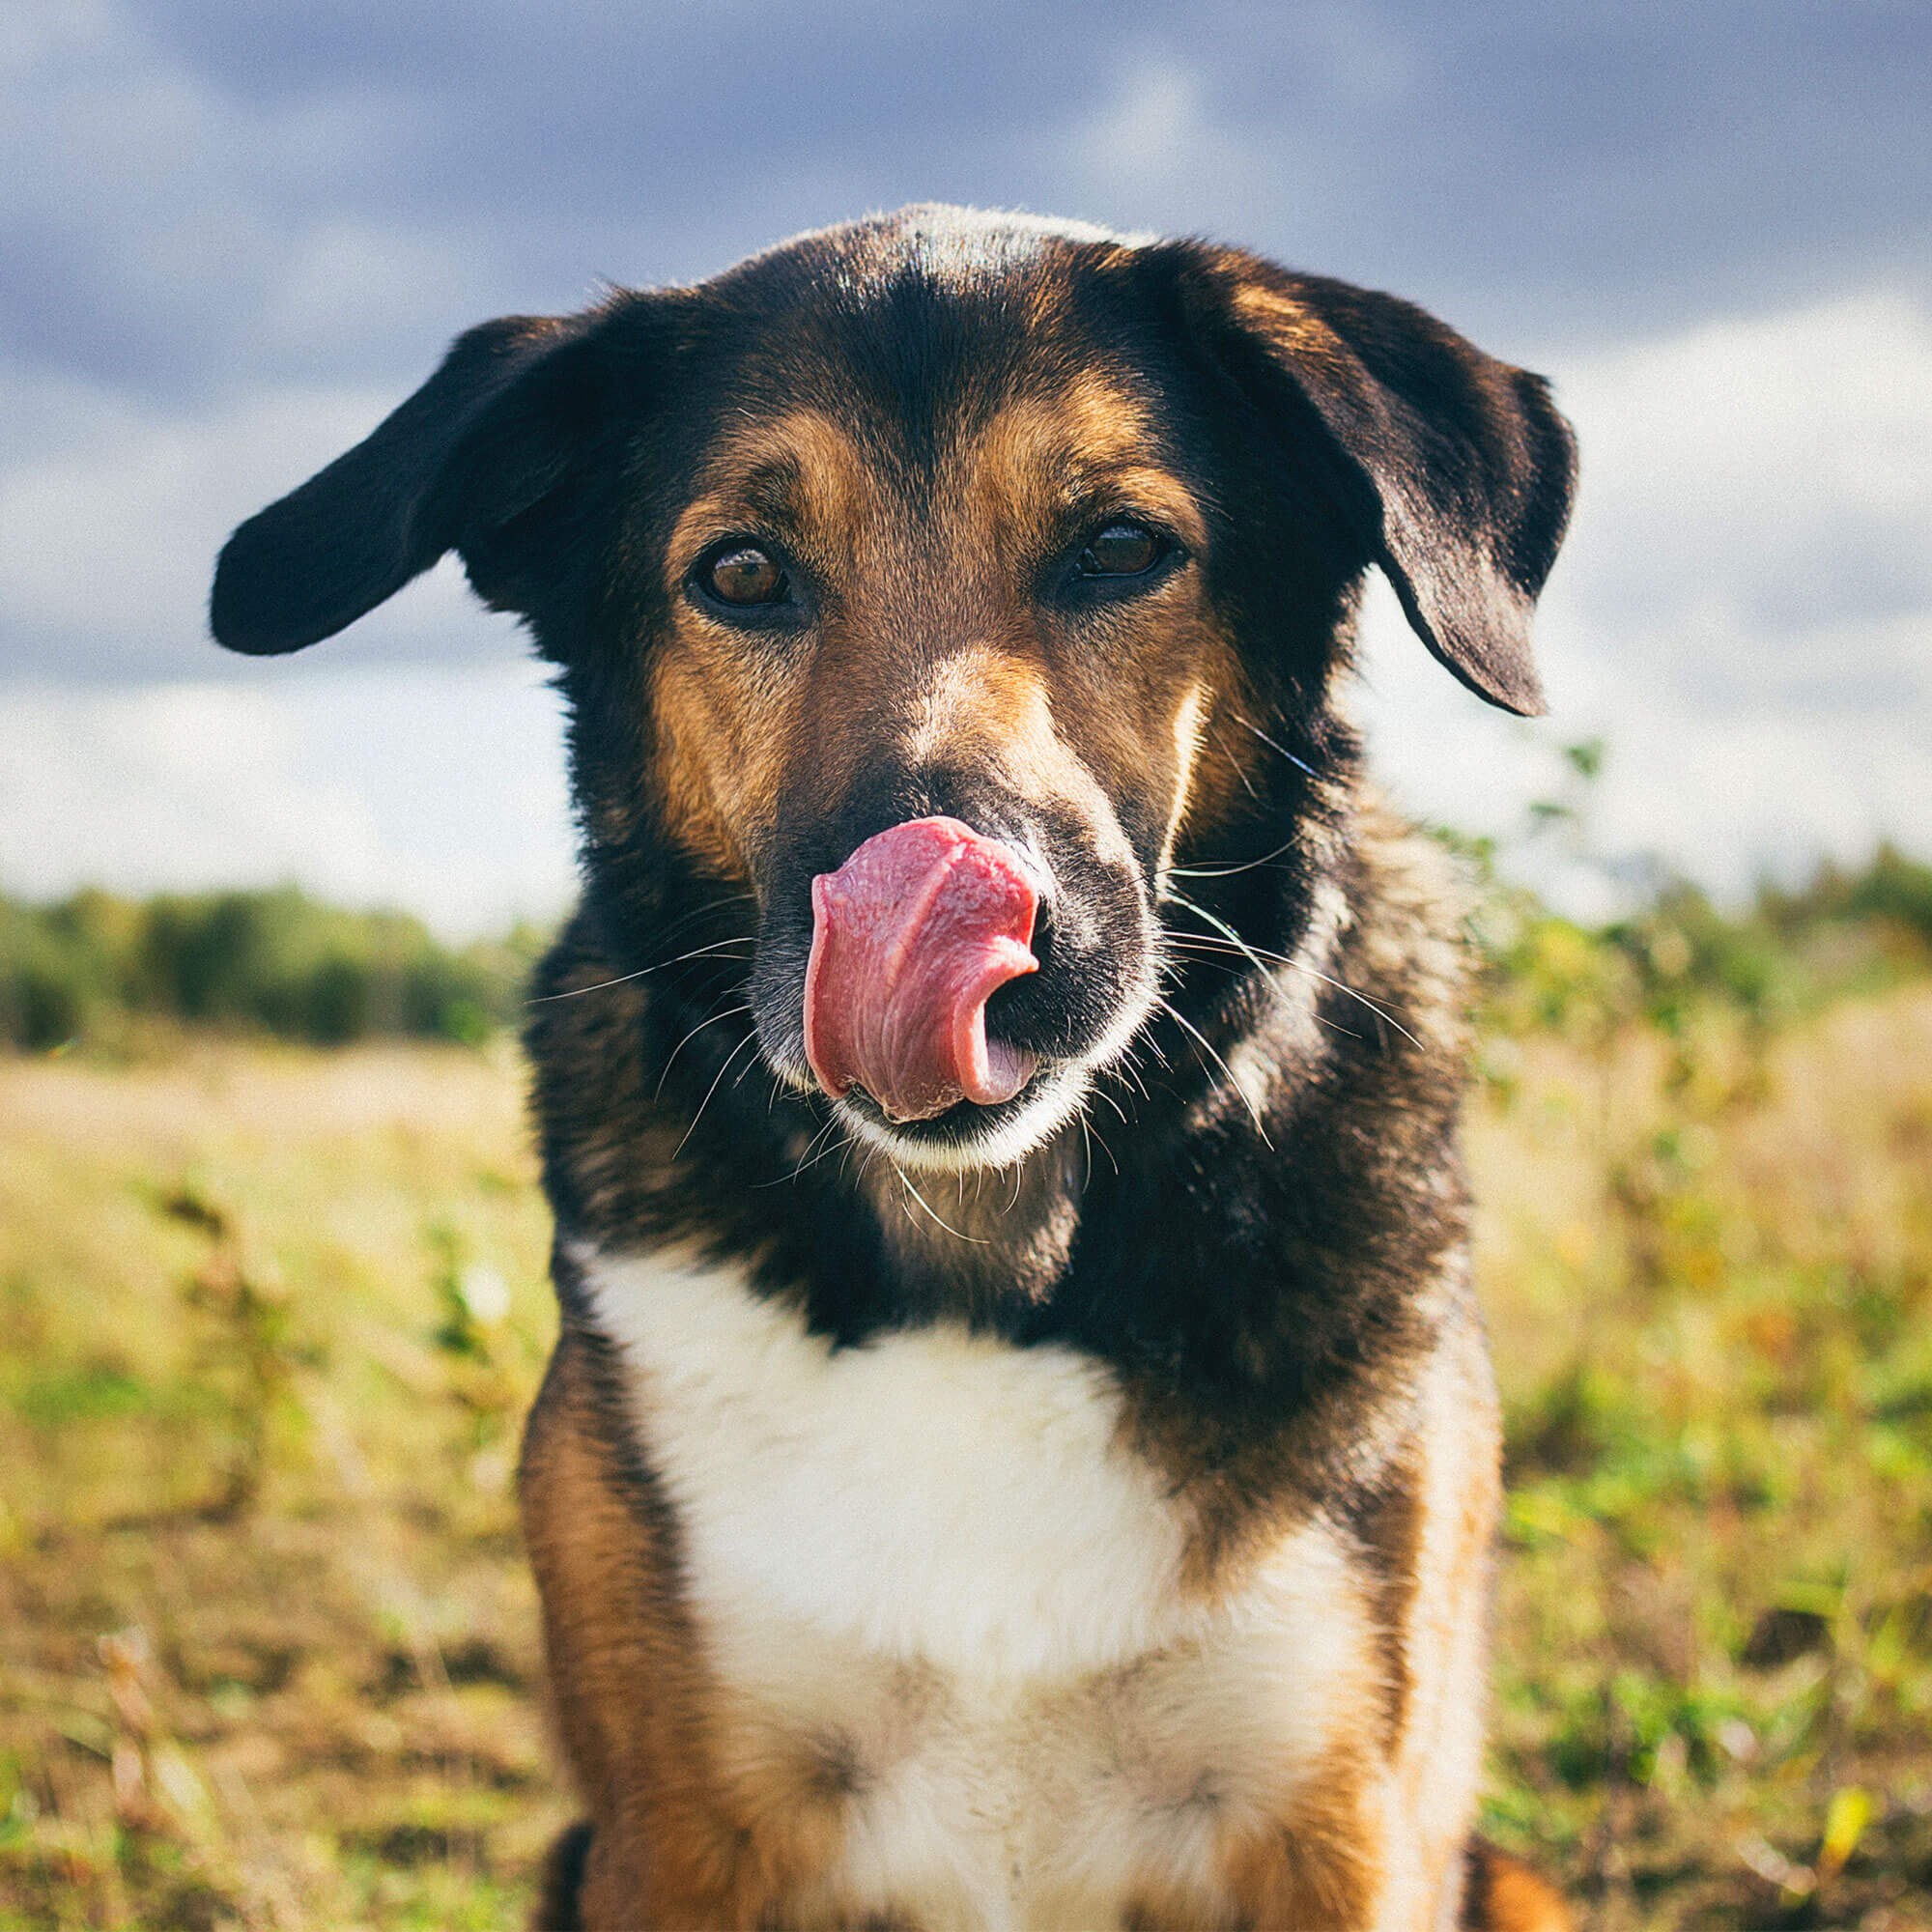 What is hypoallergenic dog food?